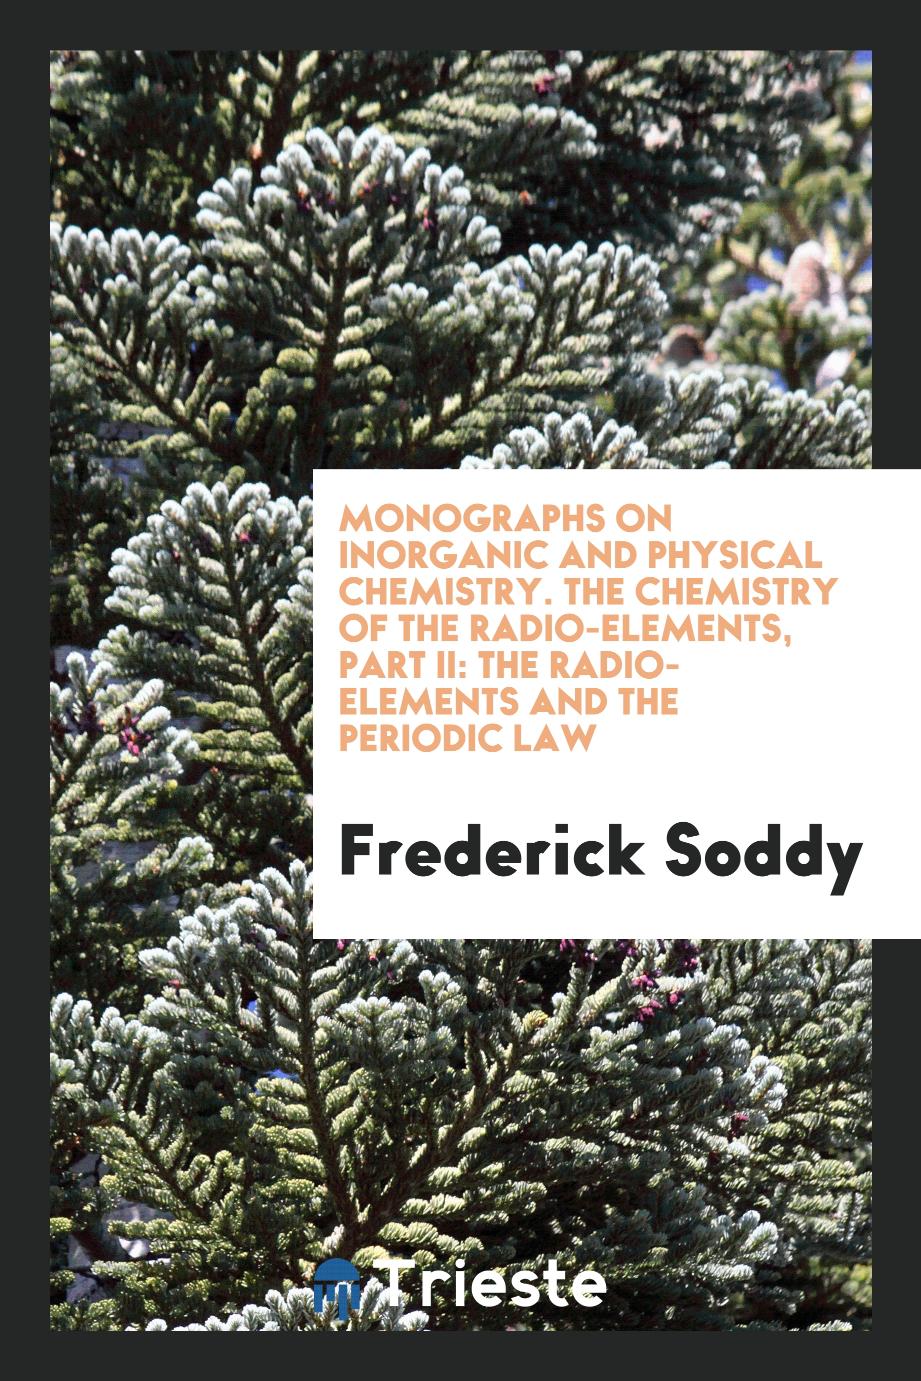 Monographs on inorganic and physical chemistry. The Chemistry of the Radio-elements, part II: The radio-elements and the periodic law